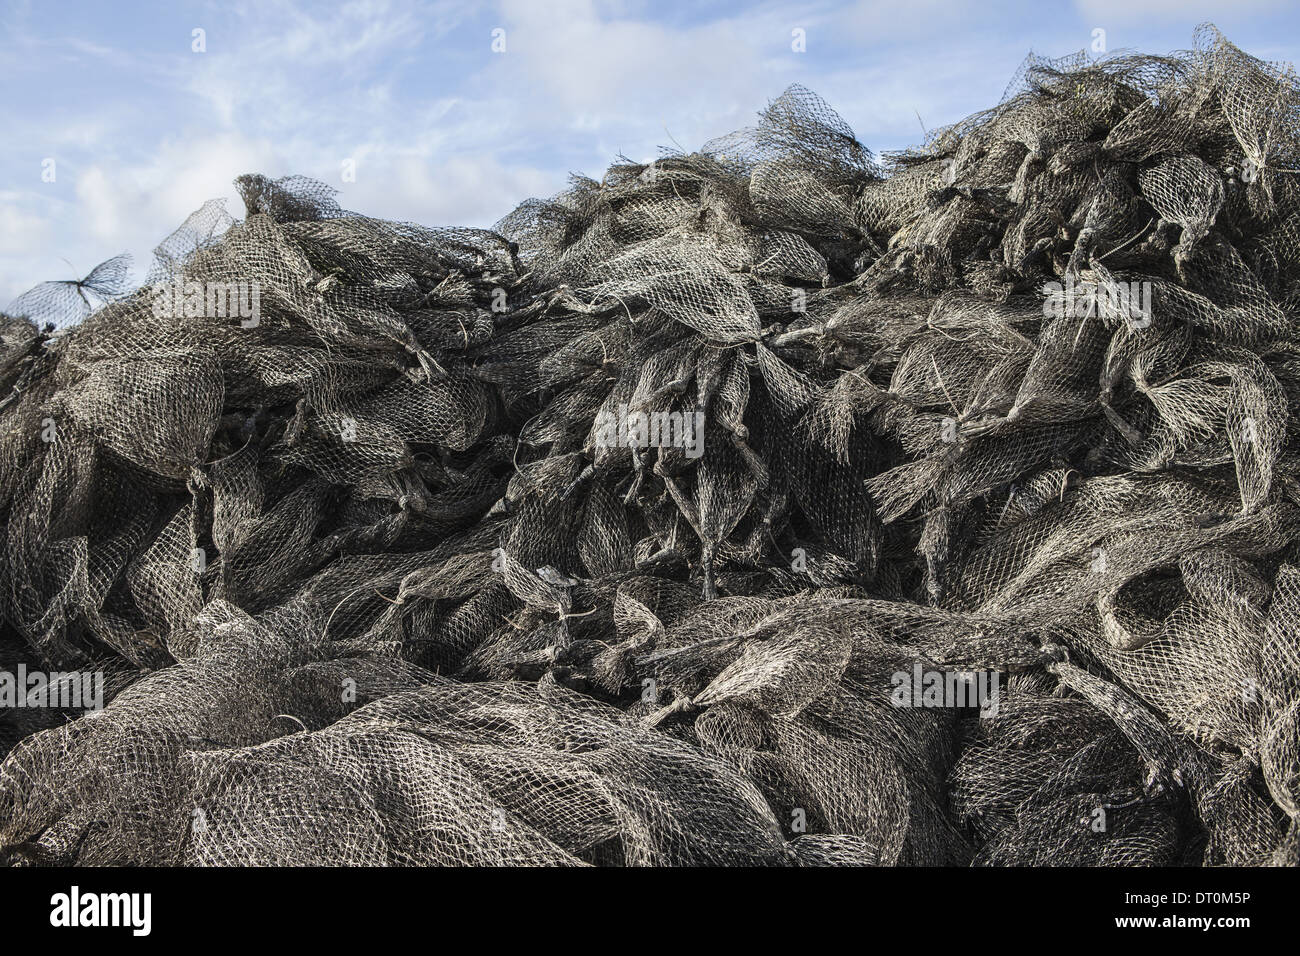 Oysterville Washington USA Nets used for shellfish aquaculture in oyster beds Stock Photo